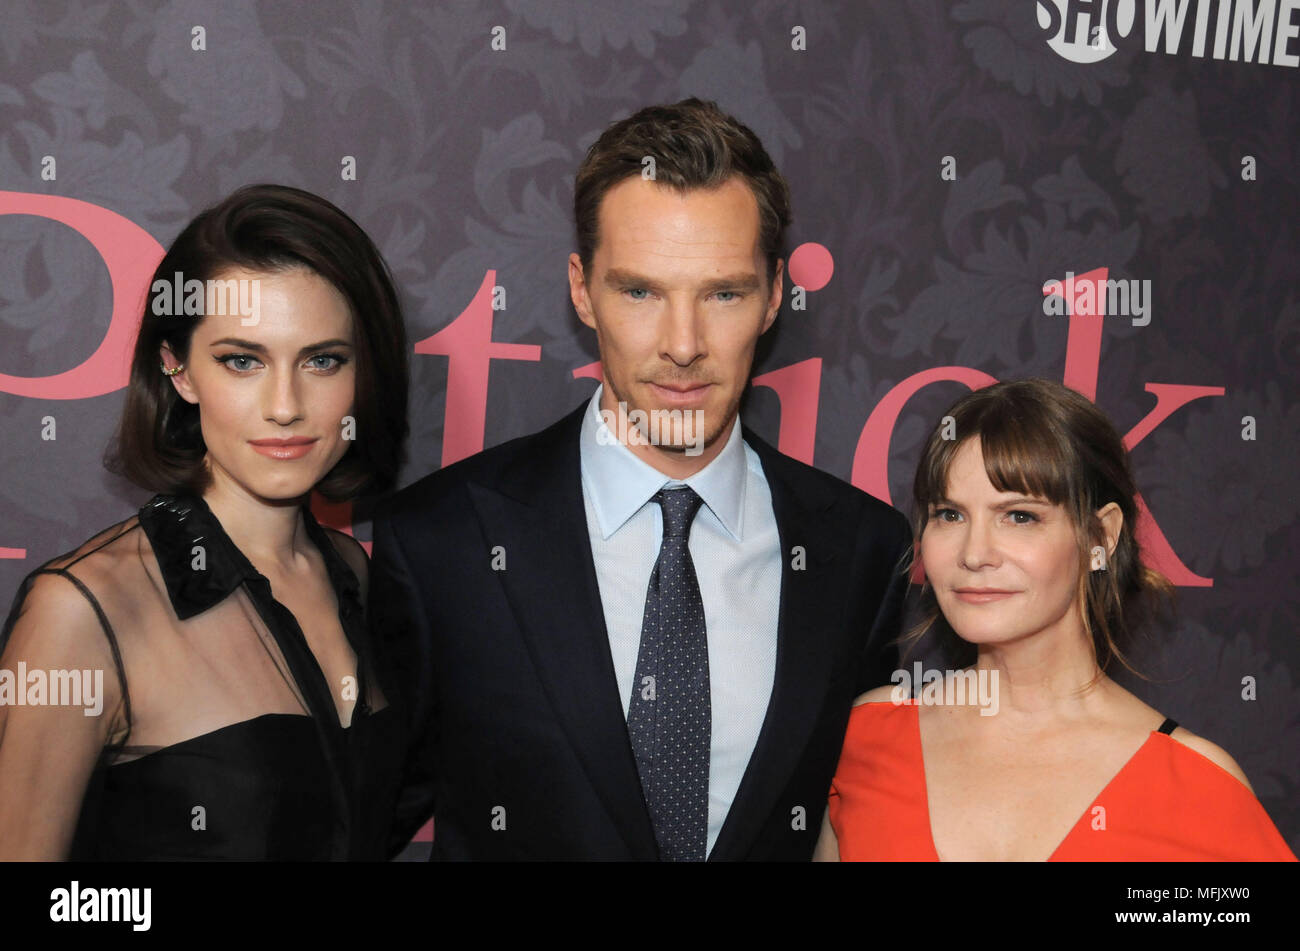 LOS ANGELES, CA - APRIL 25:  (L-R) Actress Allison Williams, actor Benedict Cumberbatch and actress Jennifer Jason Leigh attend the Premiere of Showtime's 'Patrick Melrose' at the Linwood Dunn Theater on April 25, 2018 in Los Angeles, California. Photo by Barry King/Alamy Live News Stock Photo